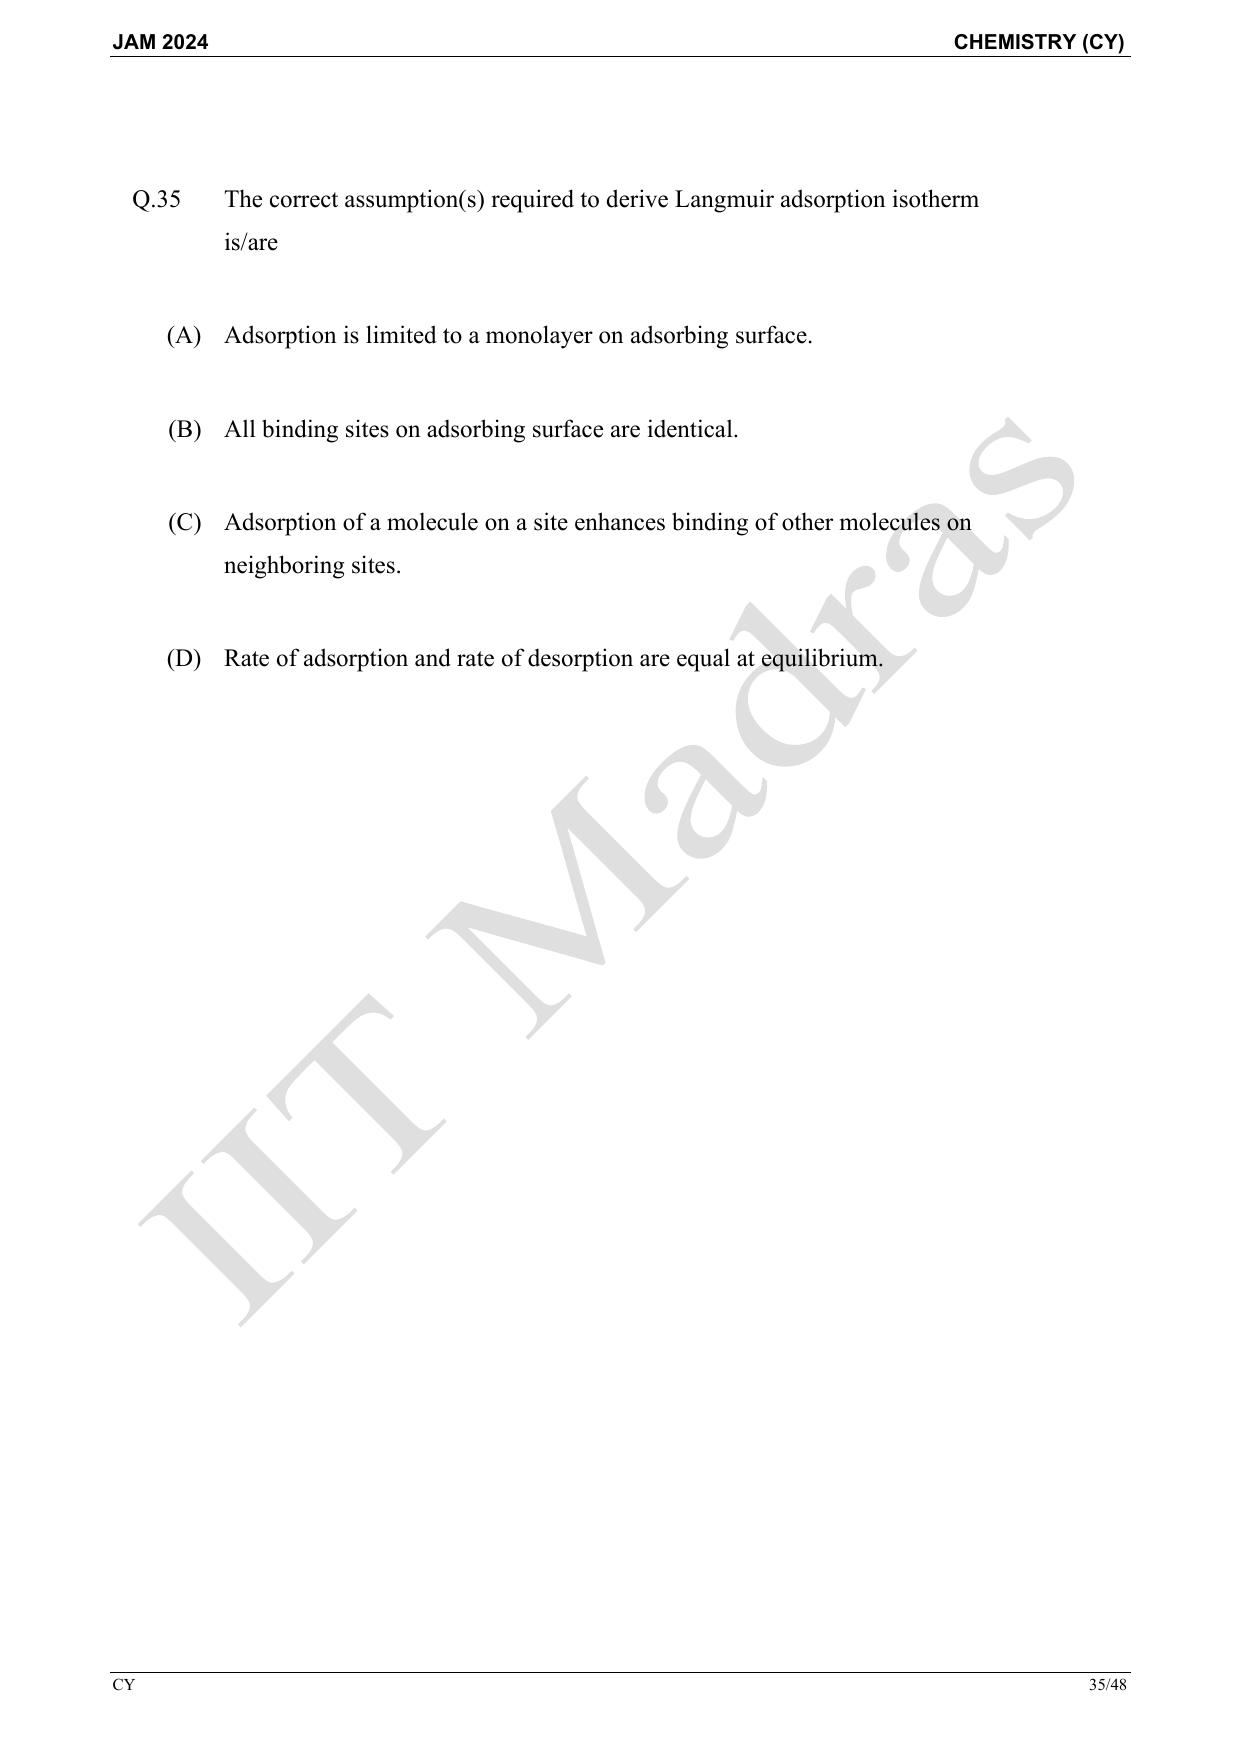 IIT JAM 2024 Chemistry (CY) Master Question Paper - Page 35